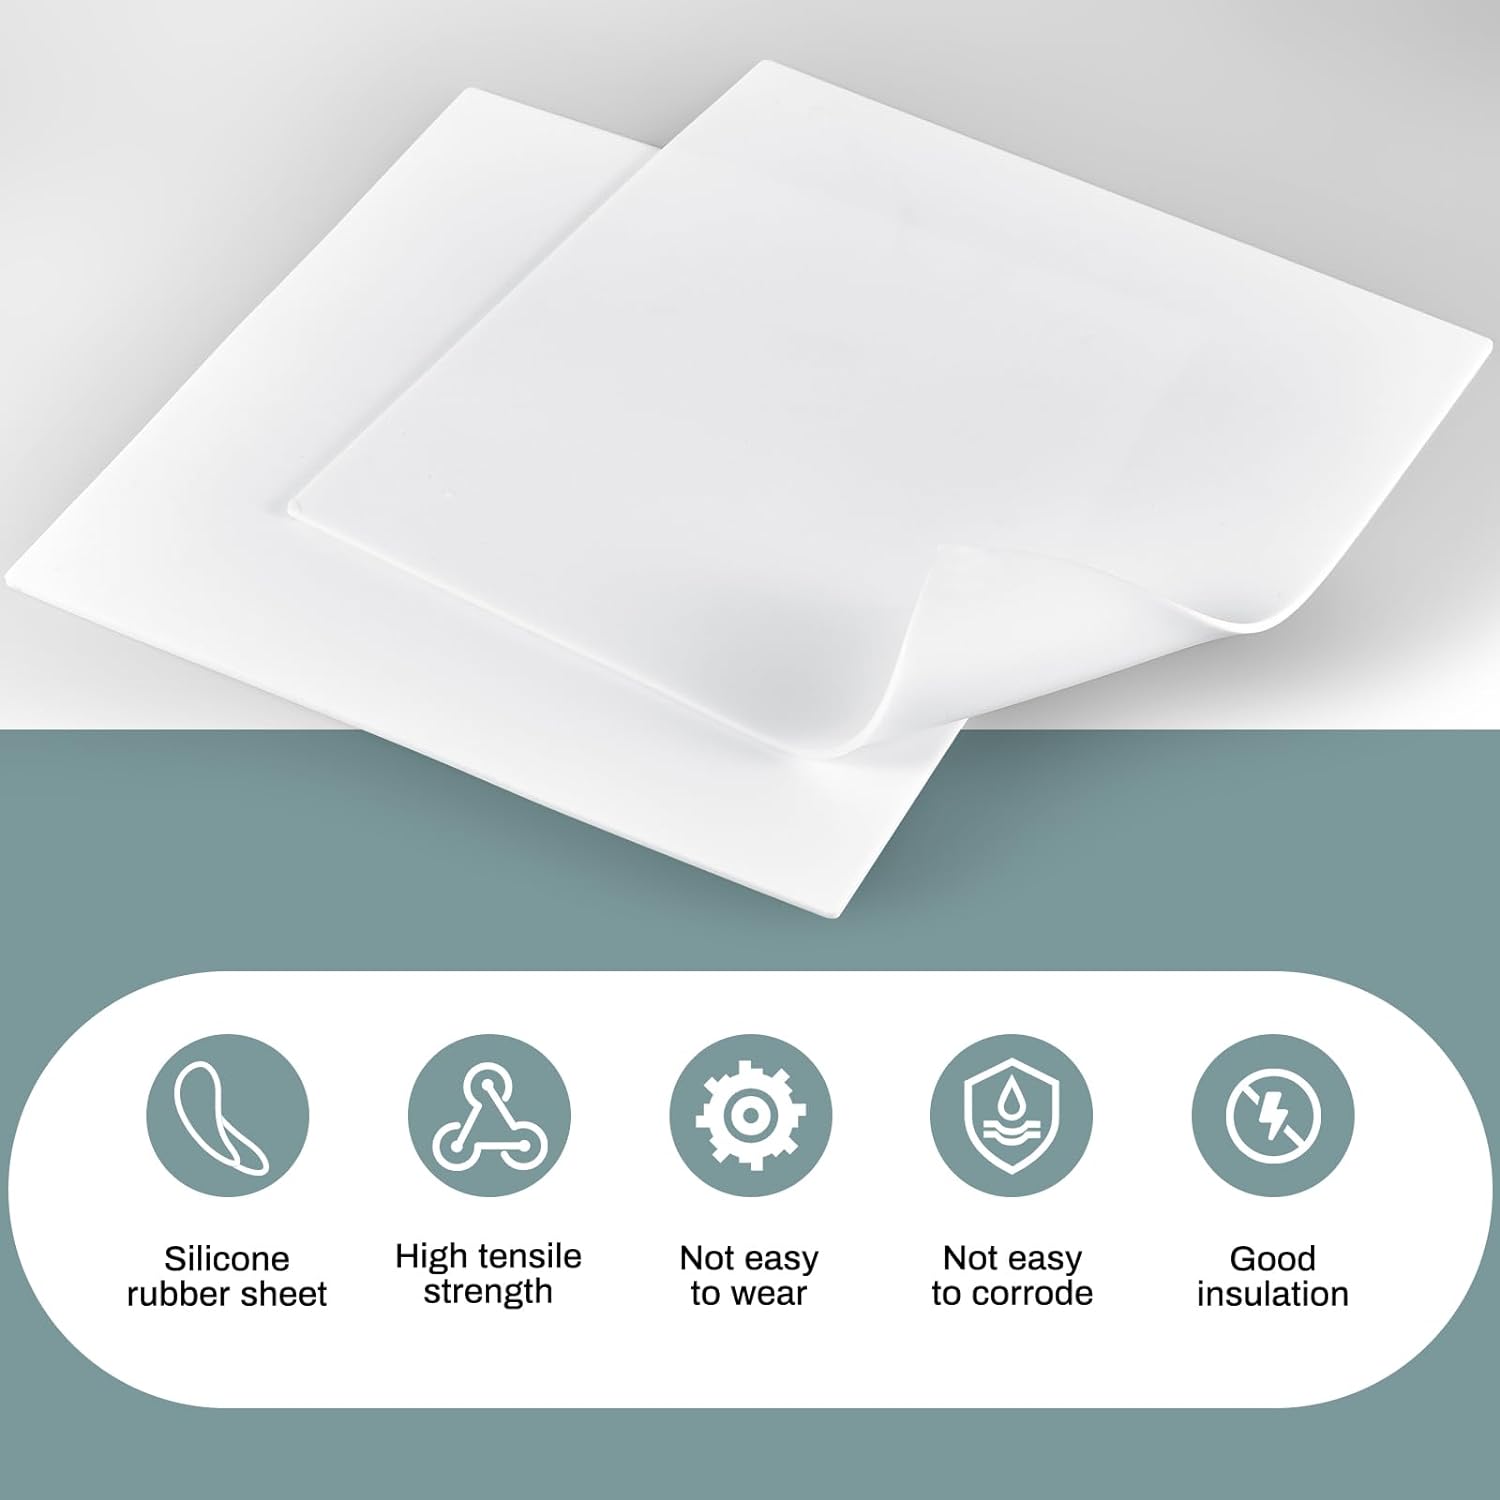 Silicone Rubber Sheet 12 x 12 Inch, 1/8 Inch White Rubber Pad, Heavy Duty Heat Resistant Rubber Gasket Material  - Paidu Suppliers